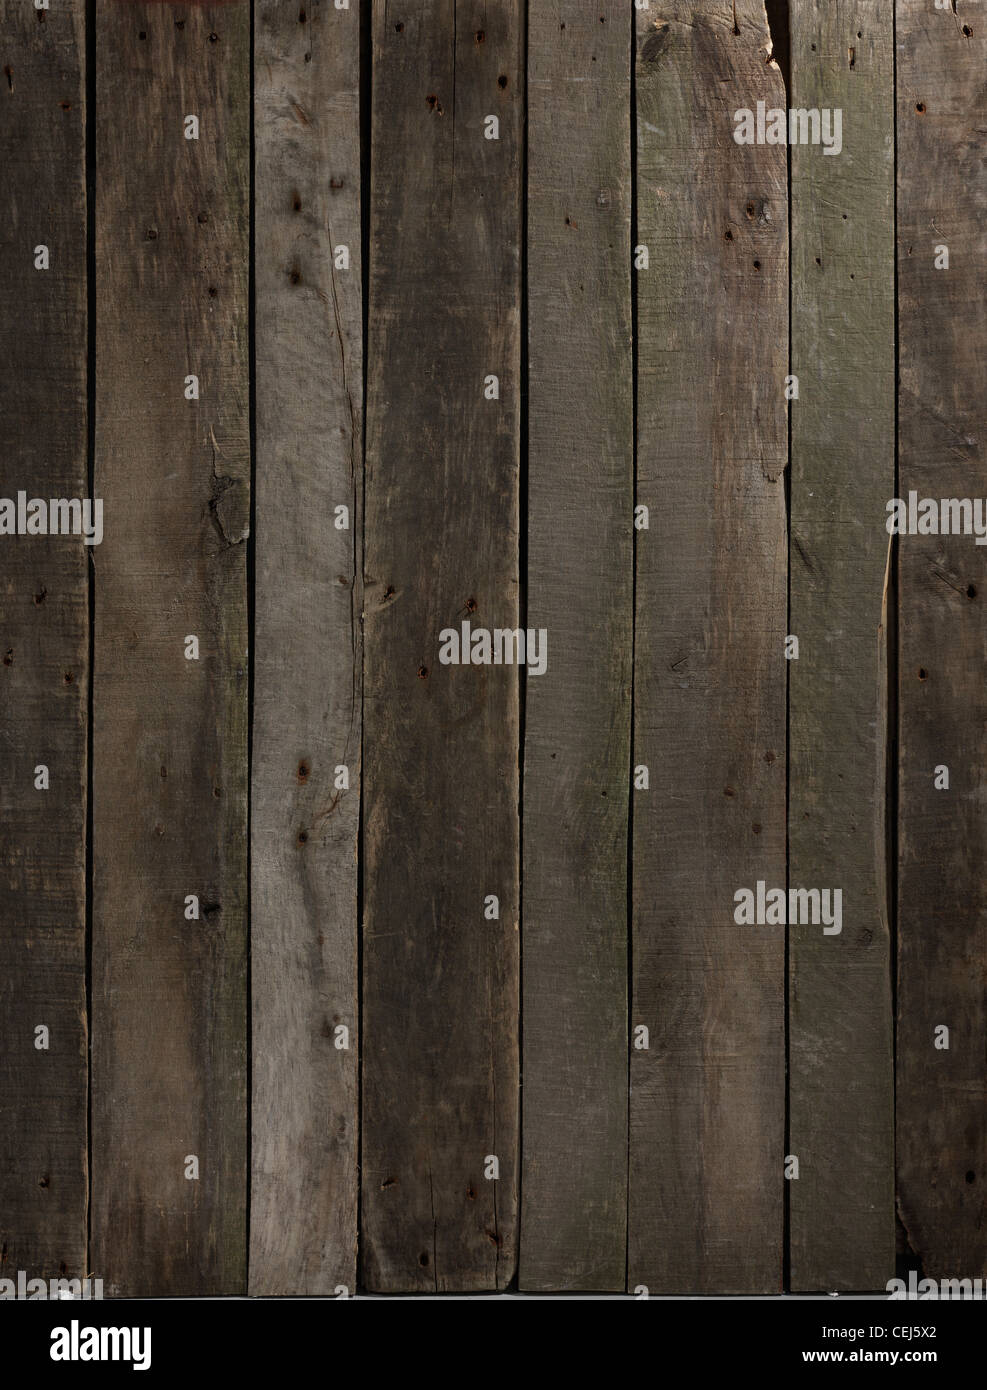 Old wood panel background with shaft of light illuminating middle section Stock Photo